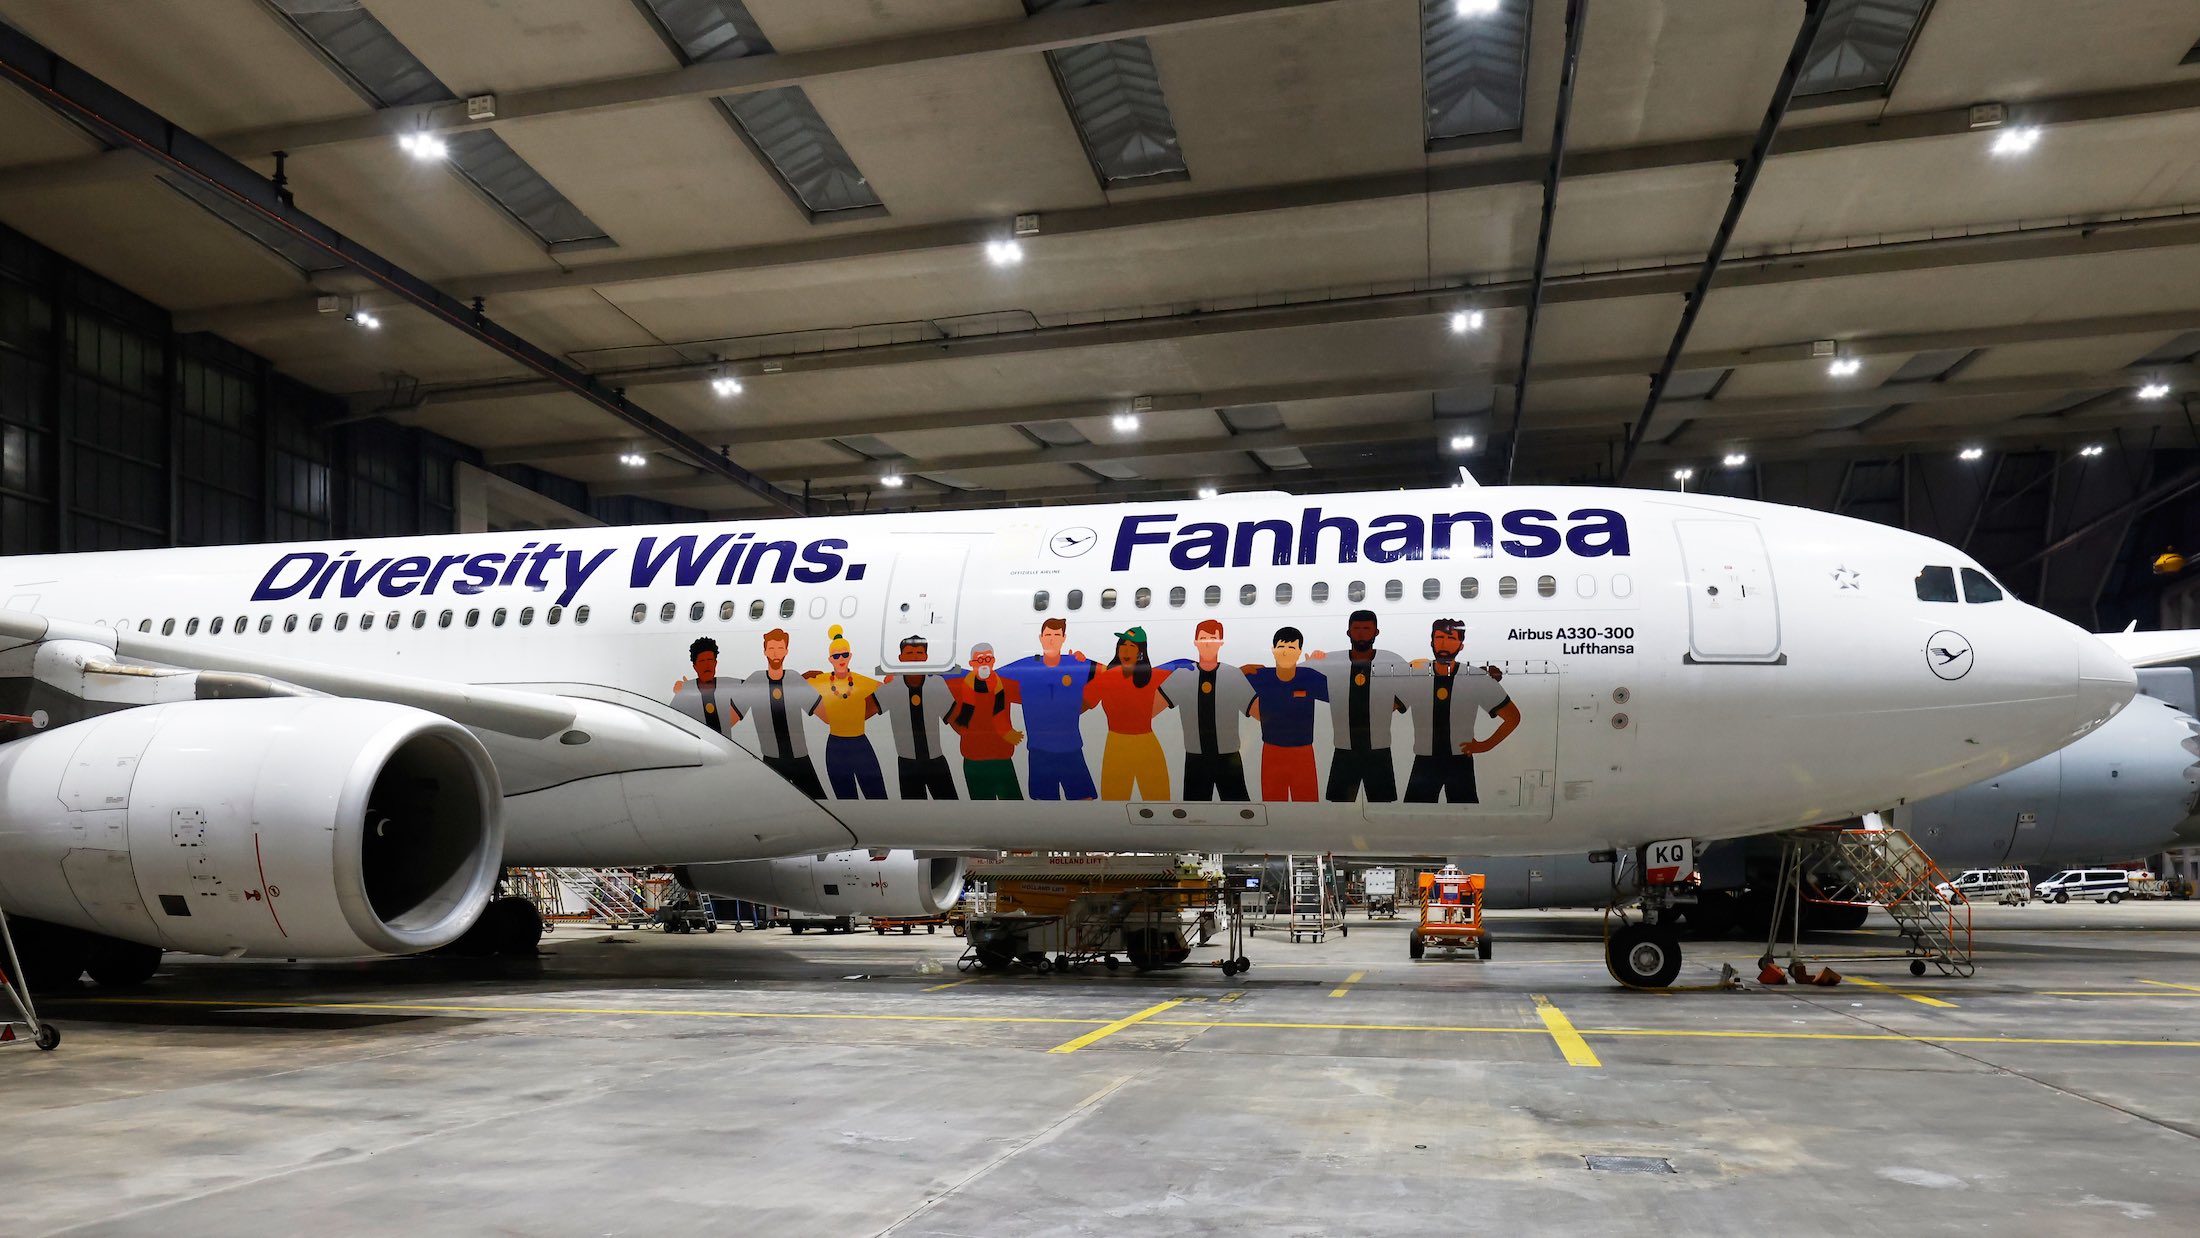 Lufthansa Unveils “Diversity Wins” Airbus A330-300 - Live and